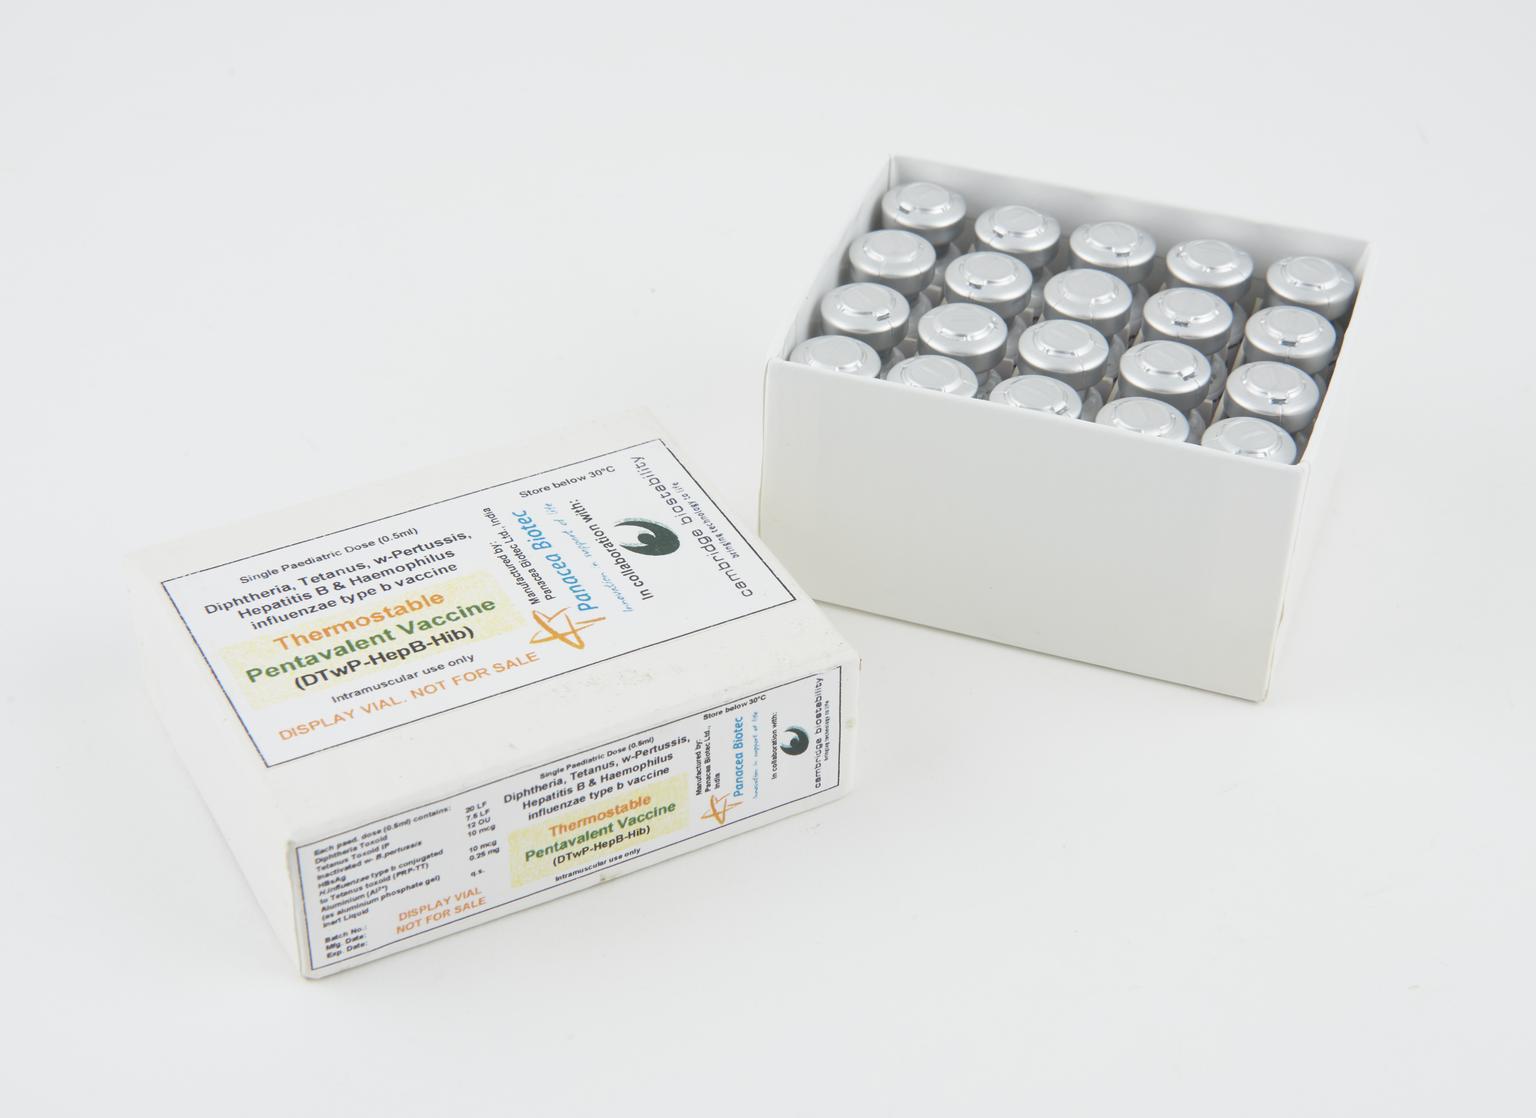 Thermostable vaccine for childhood vaccination, United Kingdom, 2007 (vaccine)